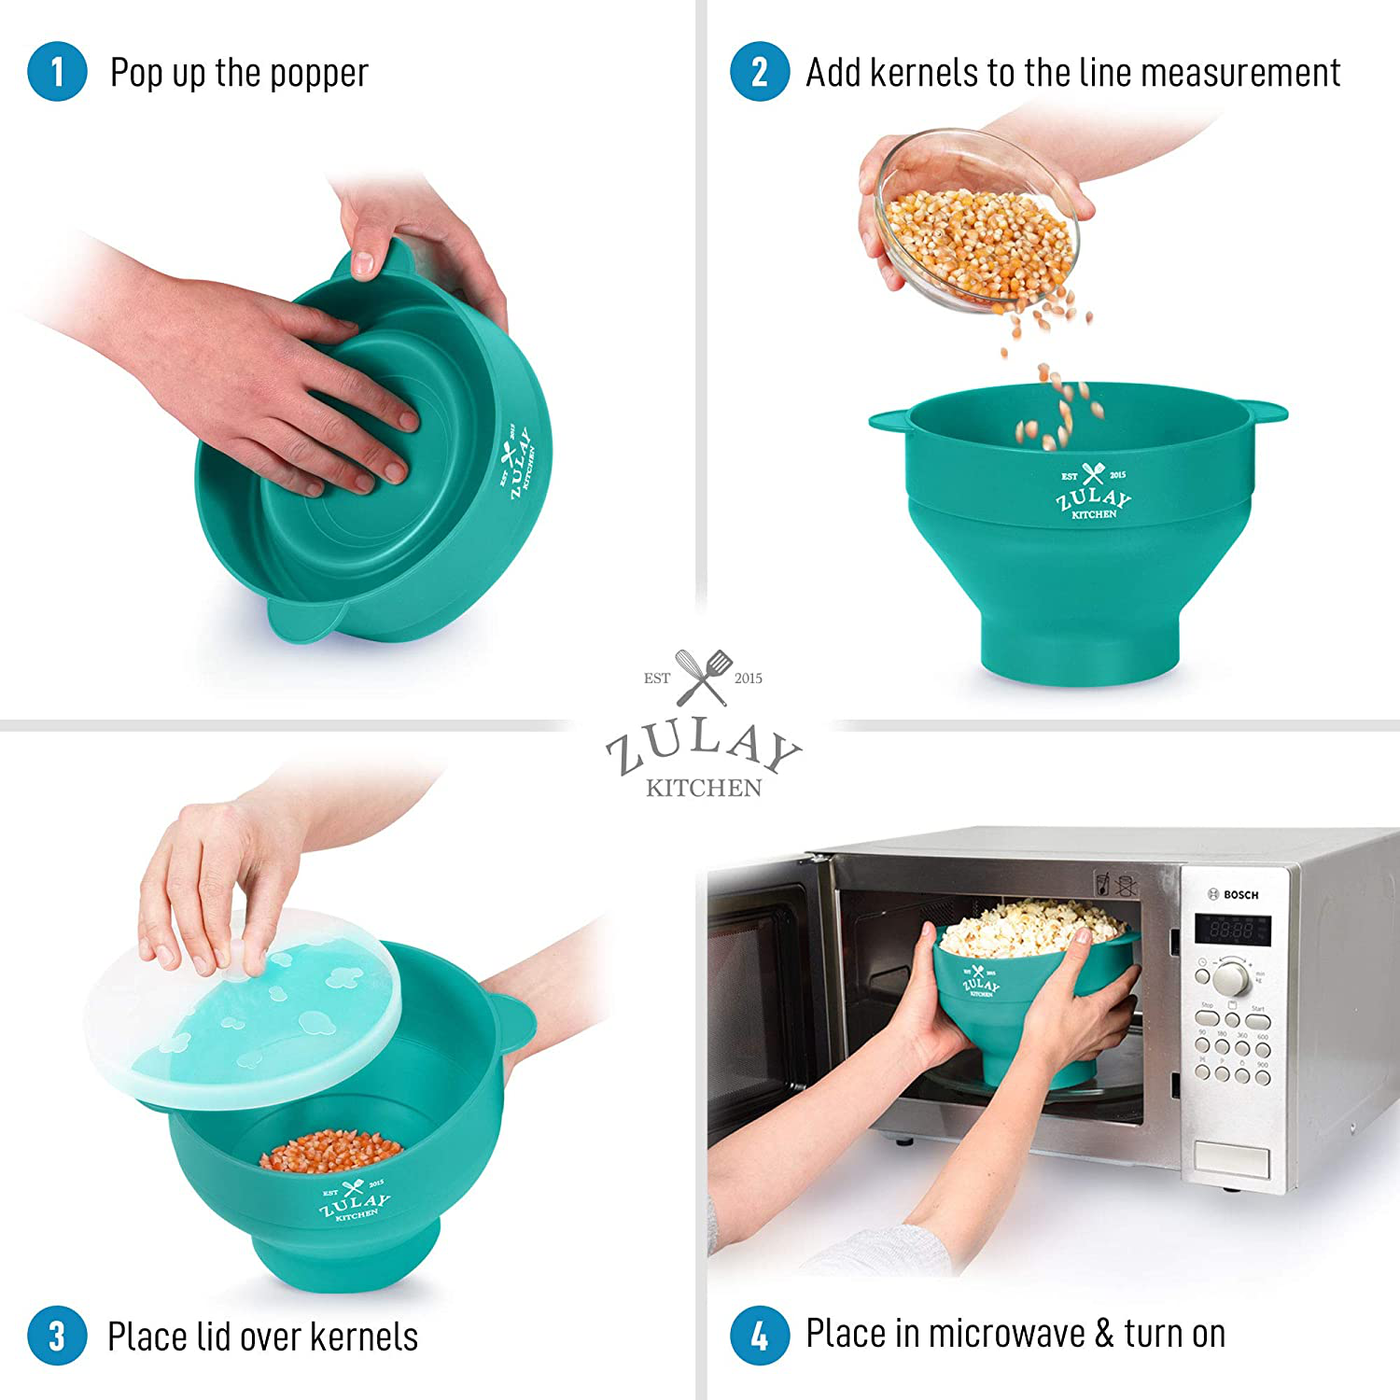 Zulay Kitchen Microwave Popcorn Popper Collapsible, BPA Free Silicone Popcorn Popper Microwave Collapsible Bowl, Quick & Easy Popcorn Popper Silicone Microwave (Aqua)